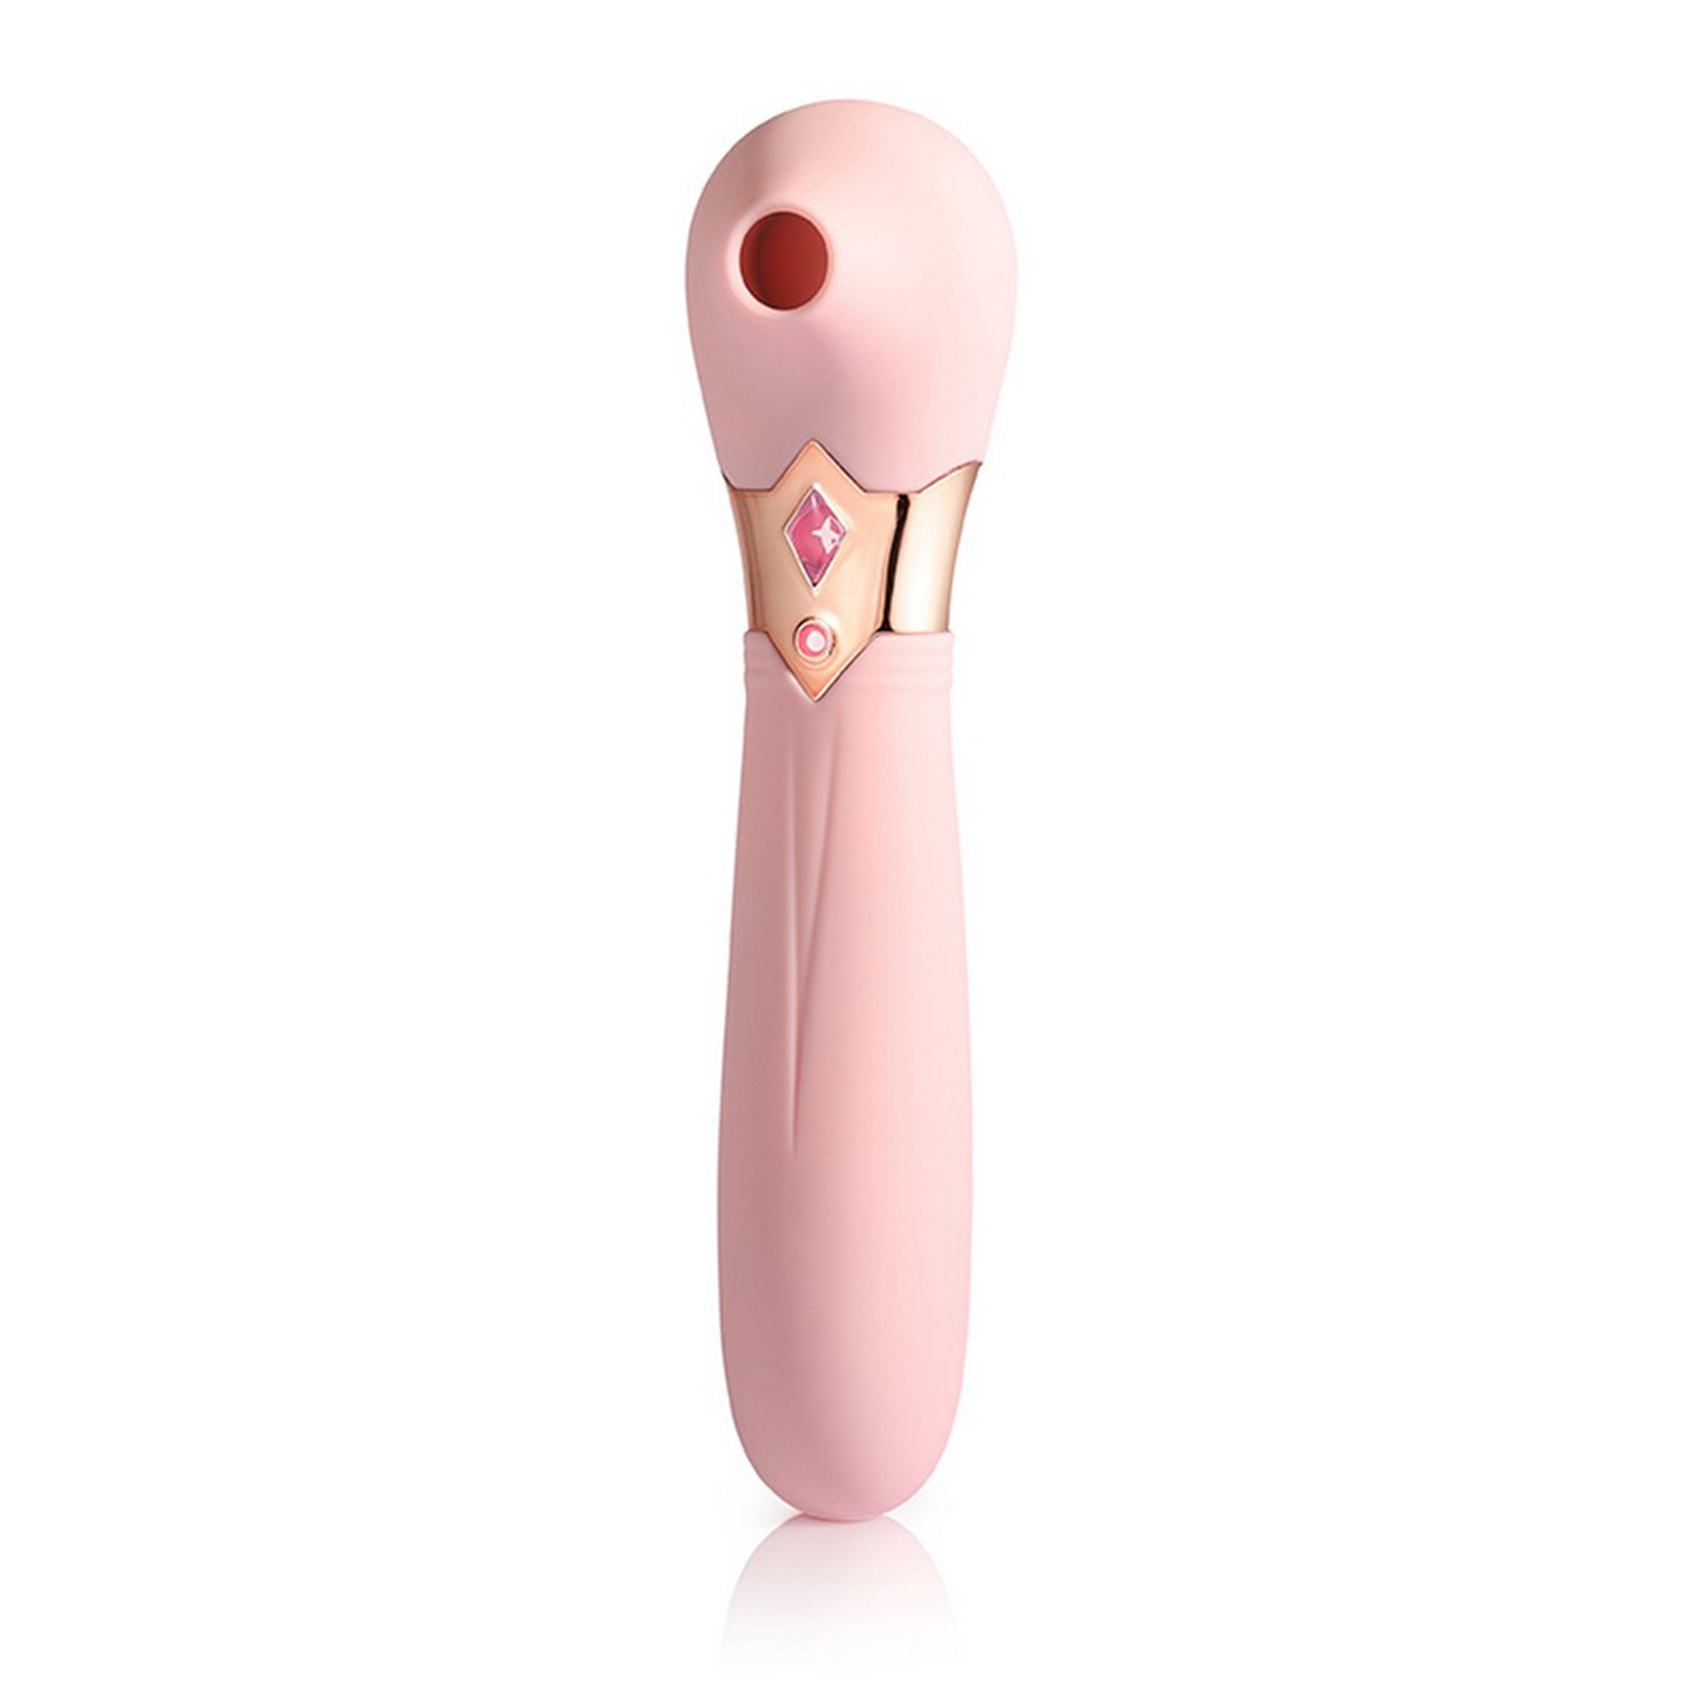 S4 Allure Crown 2-in-1 Sucking Massager & Vibrating Wand